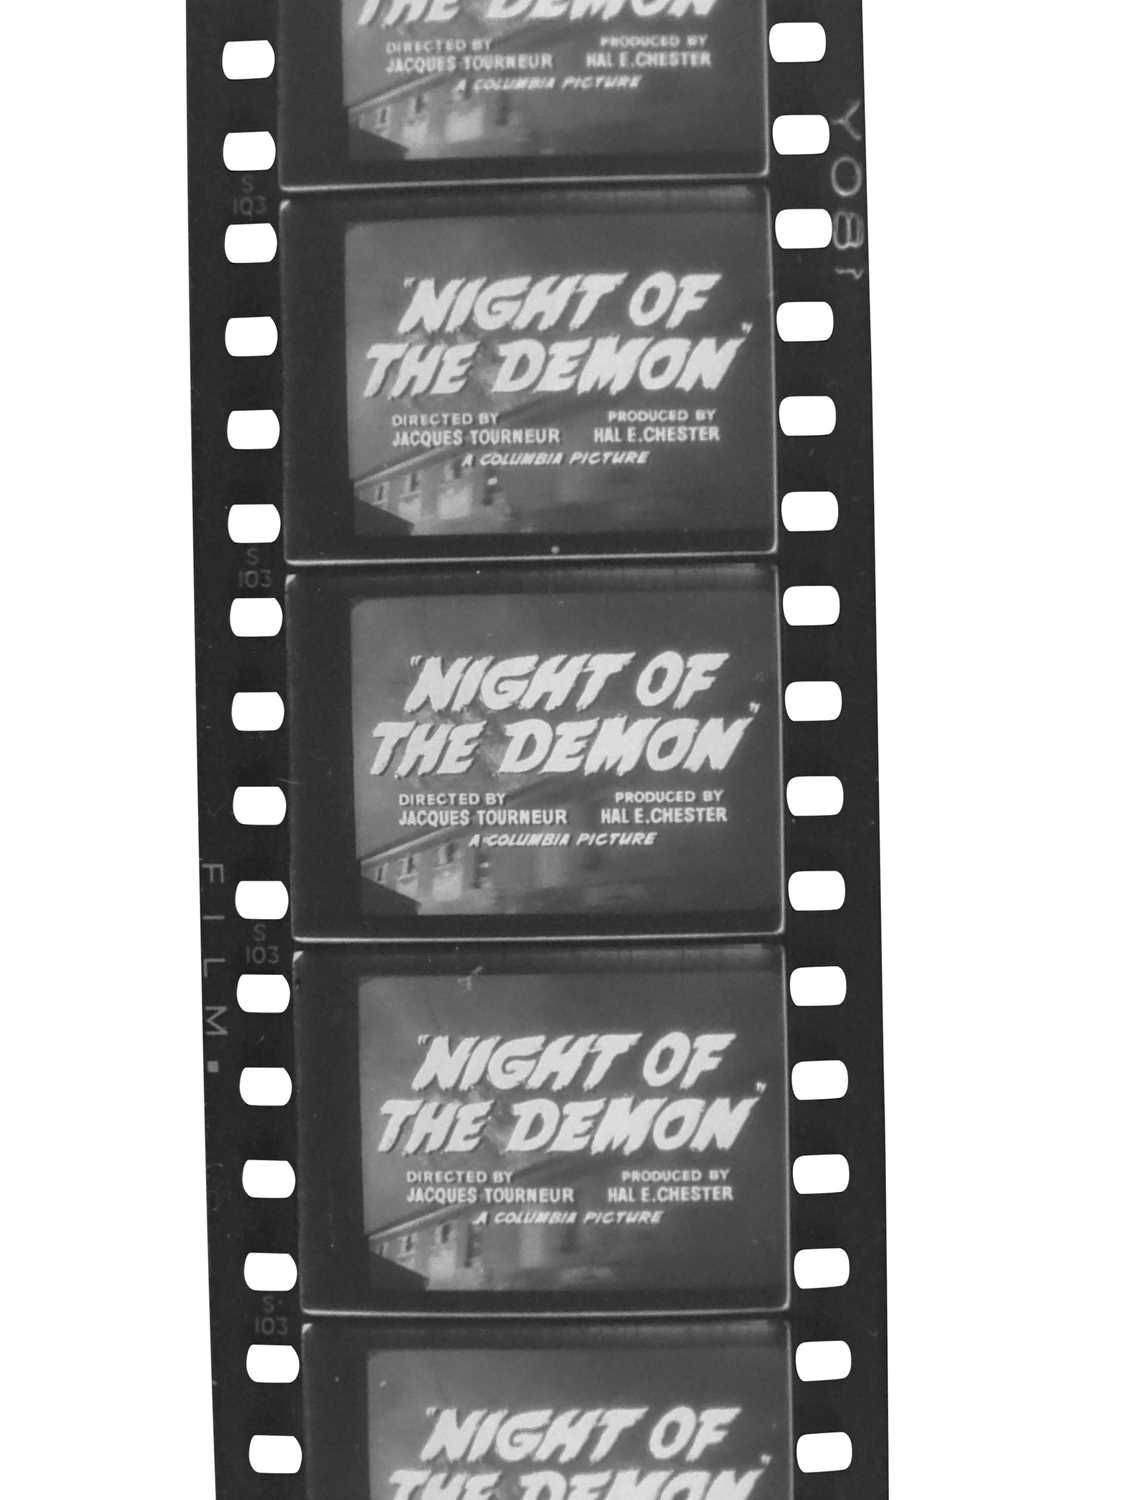 Night Of The Demon (1957) - Image 3 of 6